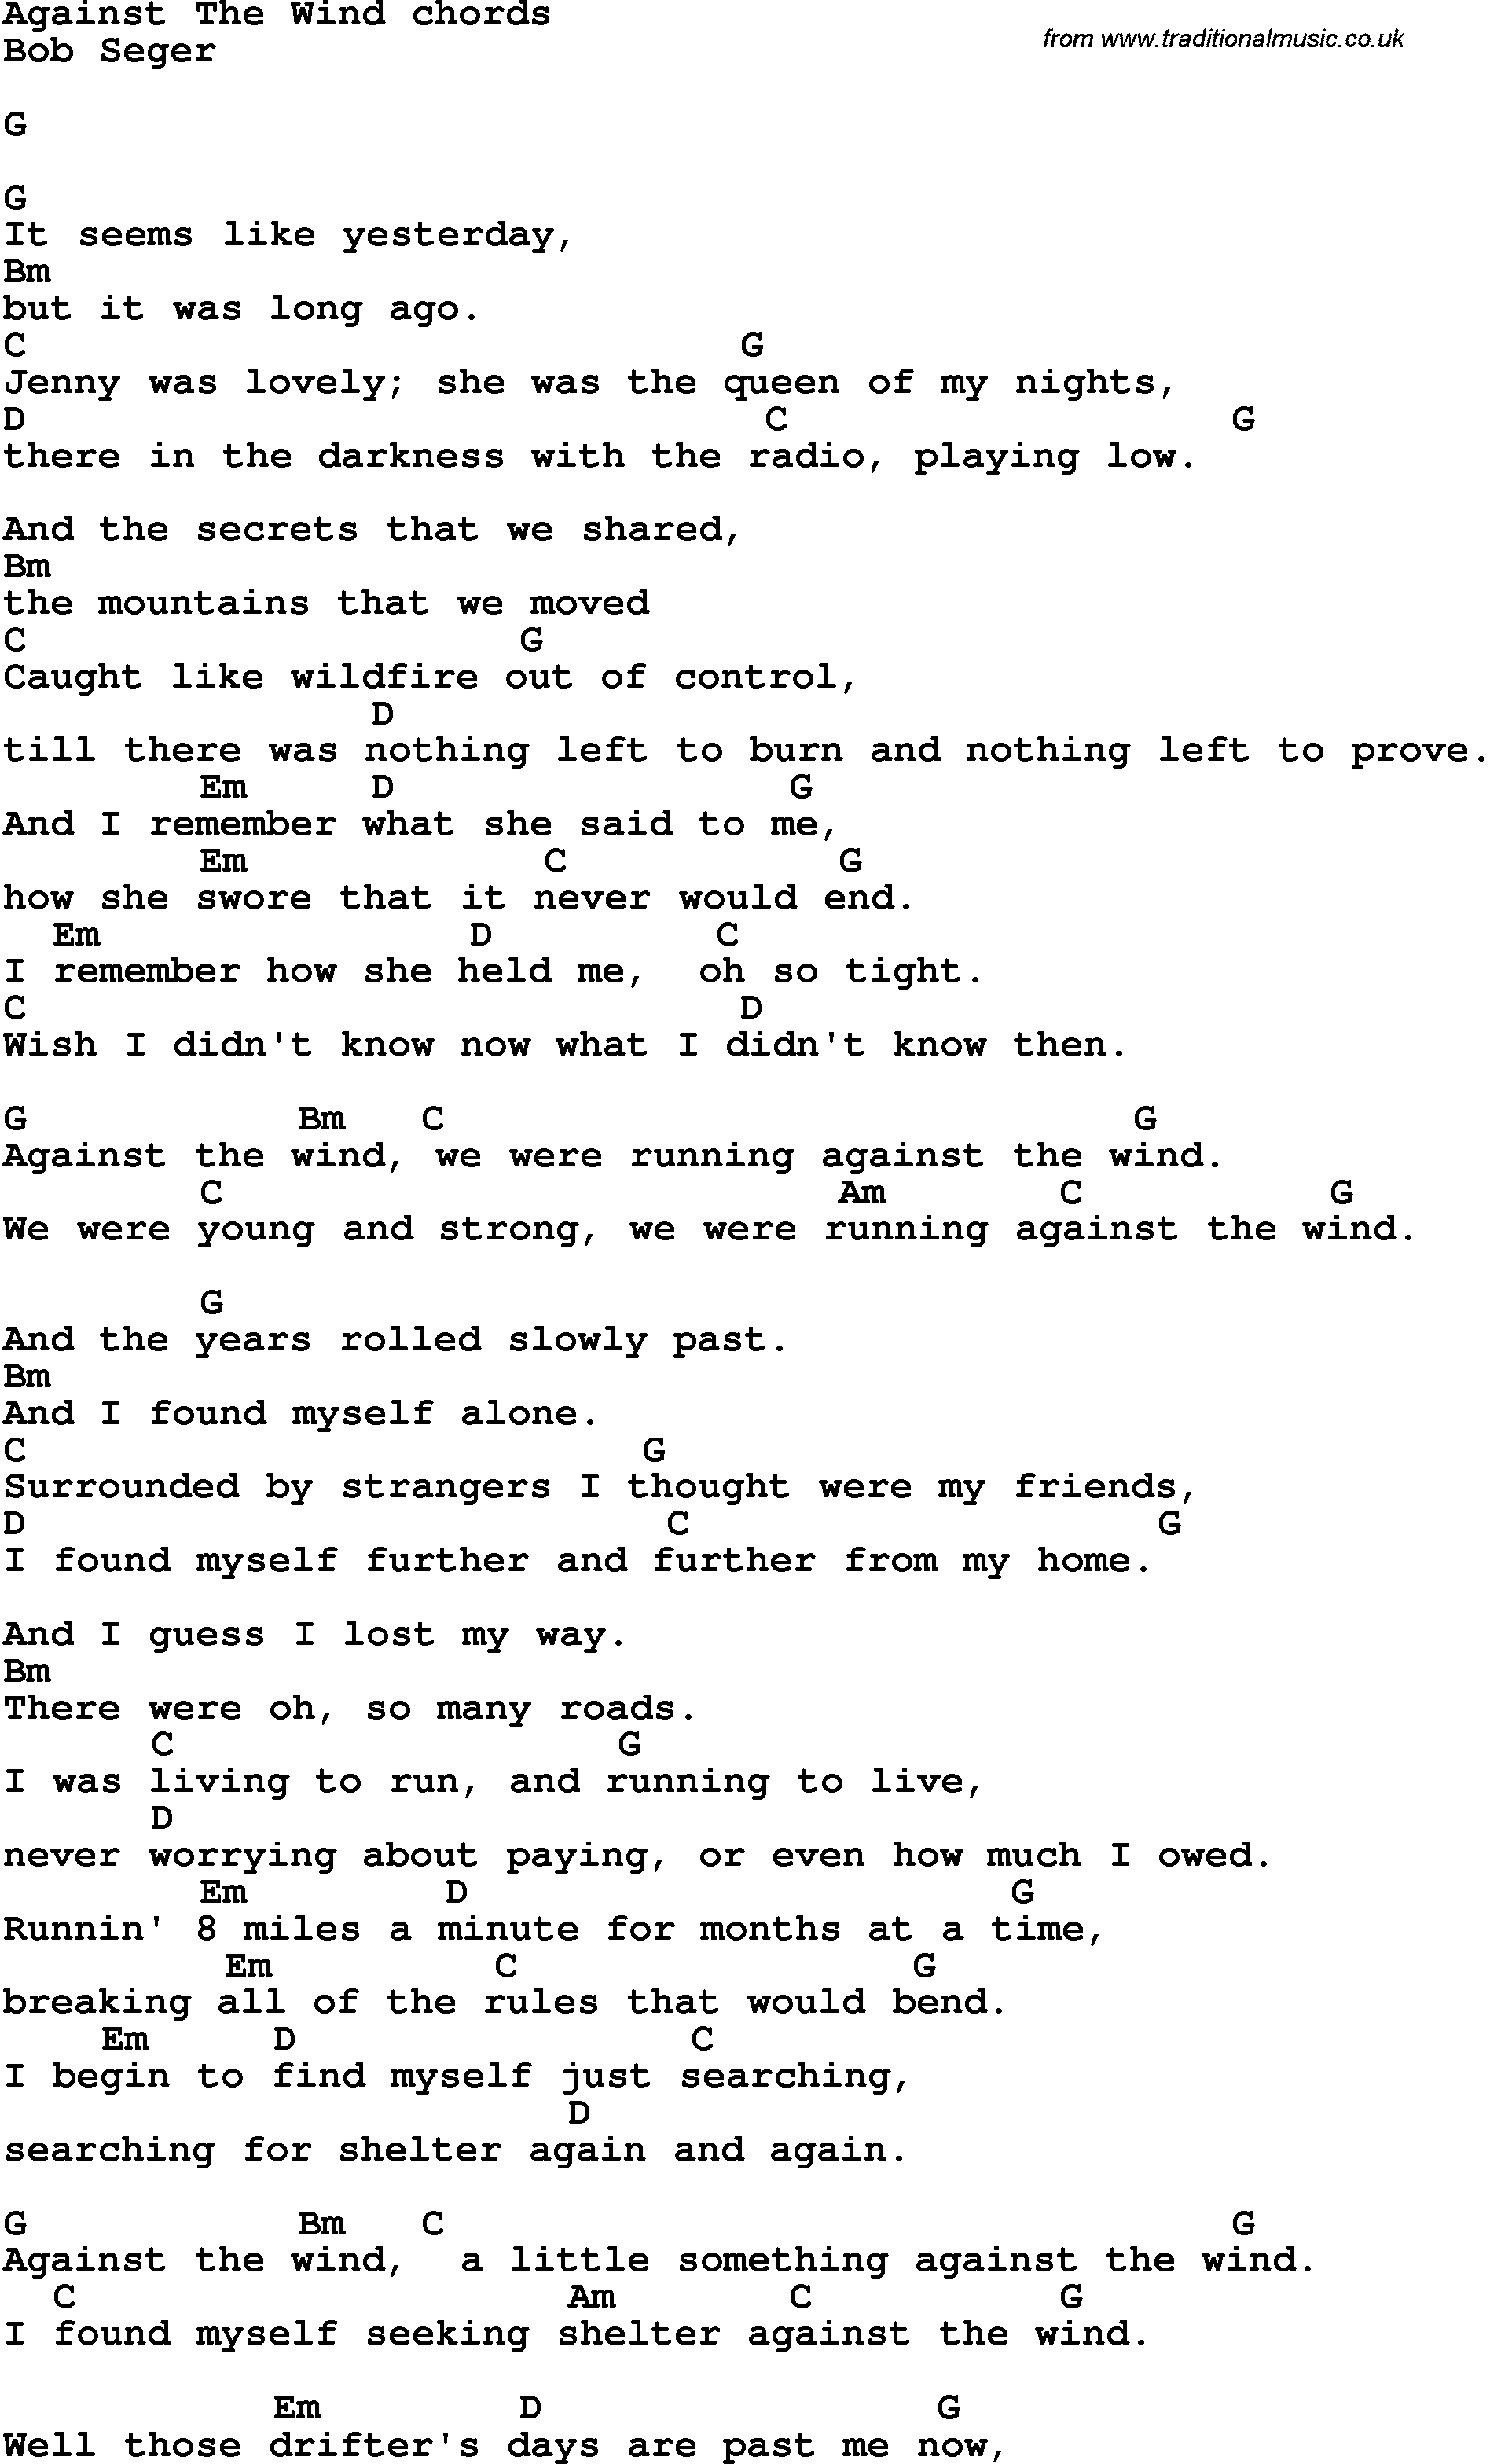 Song Lyrics With Guitar Chords For Against The Wind | Guitar In 2019 - Free Printable Song Lyrics With Guitar Chords